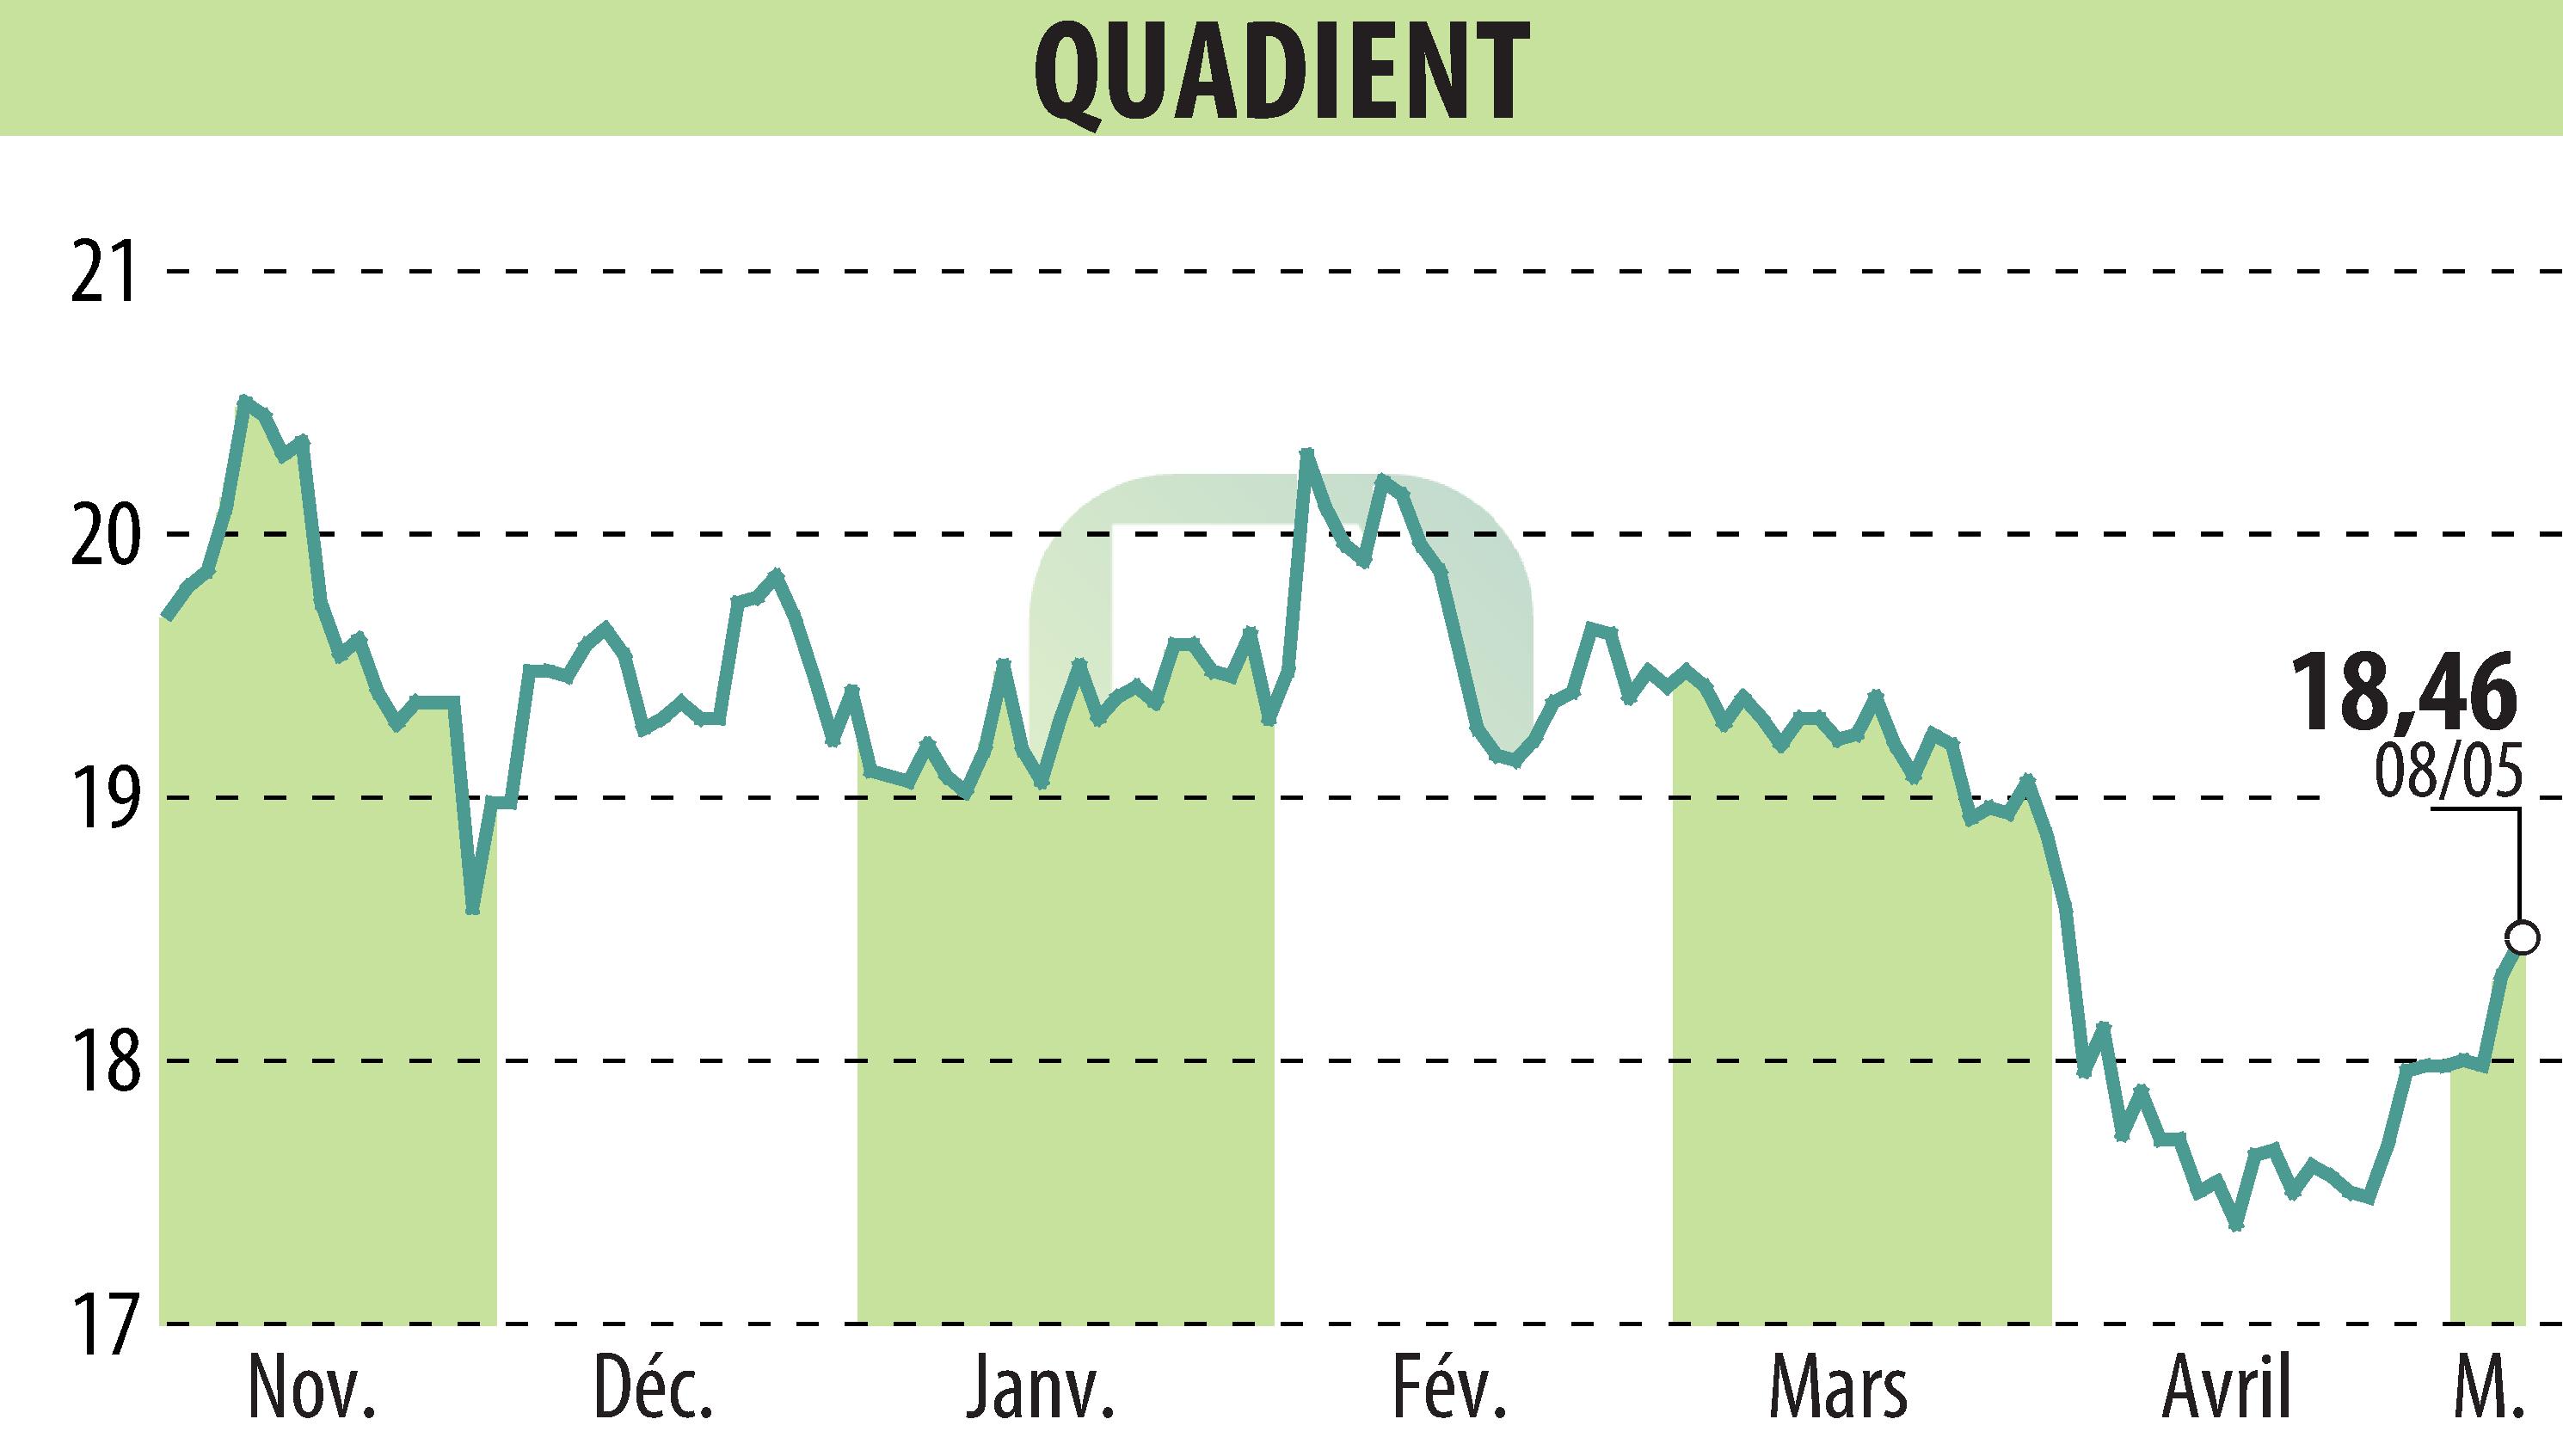 Stock price chart of QUADIENT (EPA:QDT) showing fluctuations.